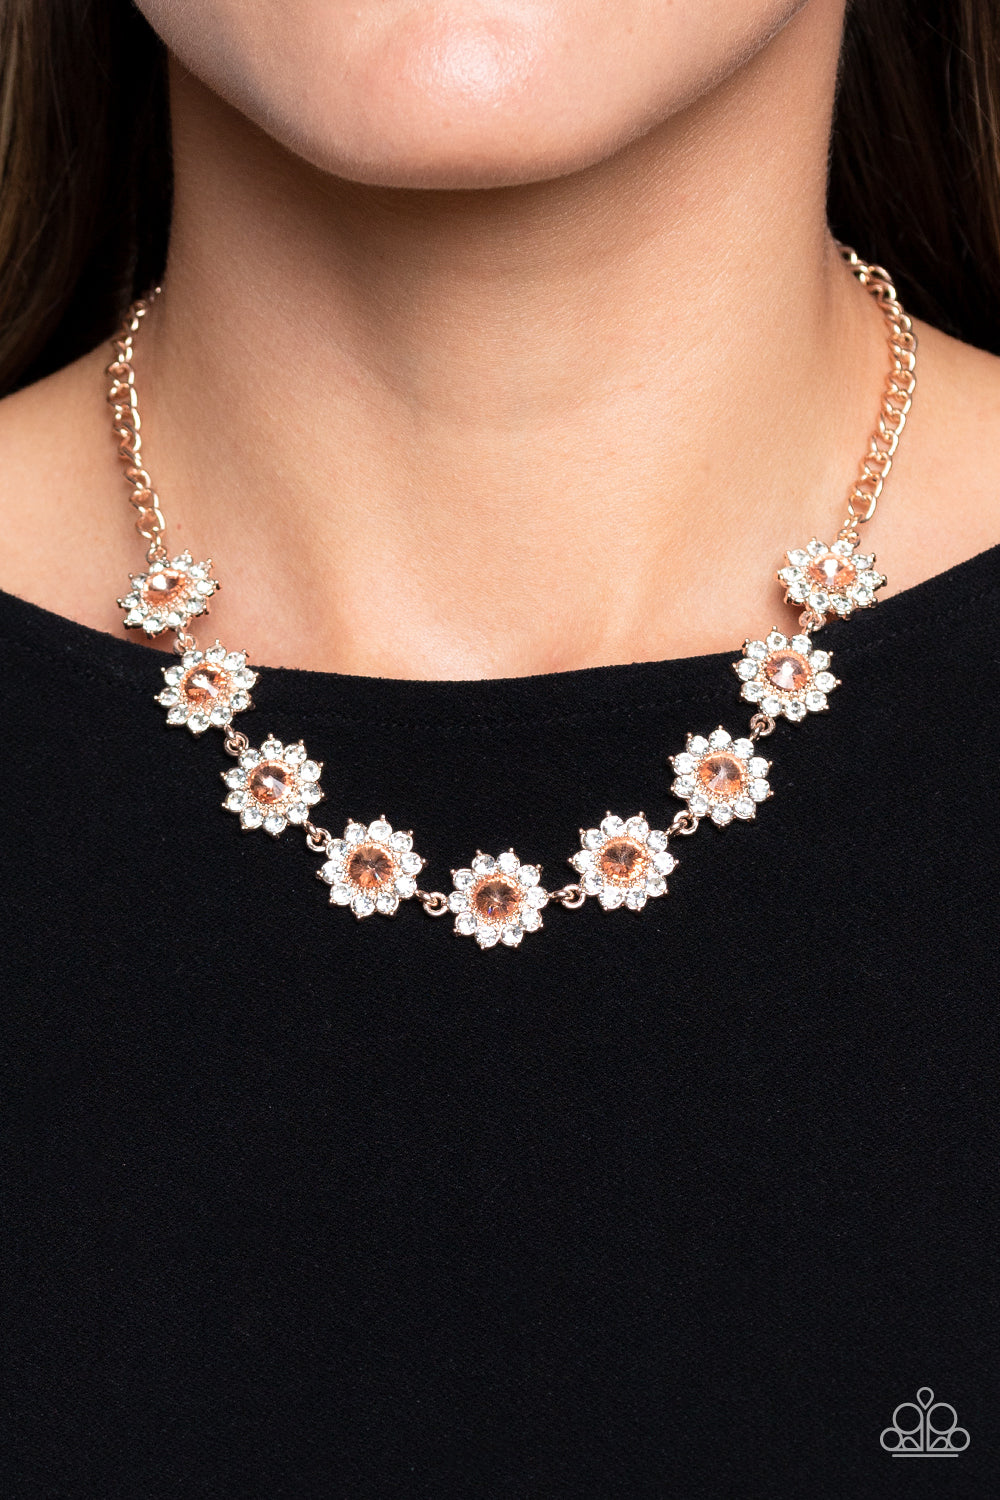 Blooming Strass Necklace S00 - Fashion Jewellery M68374